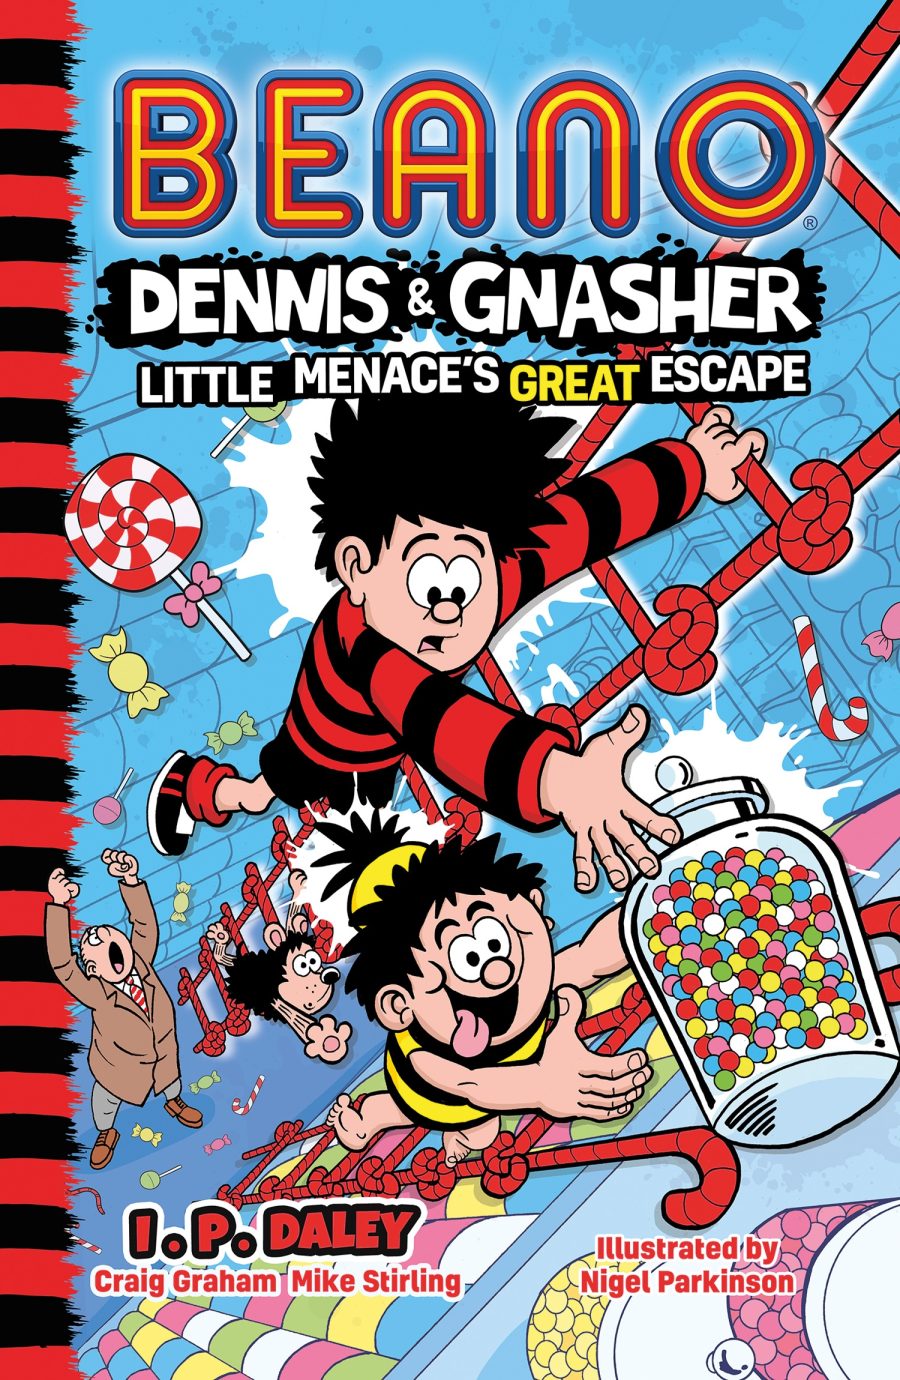 Beano Great Escape book cover. Dennis and friends are trying to climb up a rope ladder surrounded by sweets.